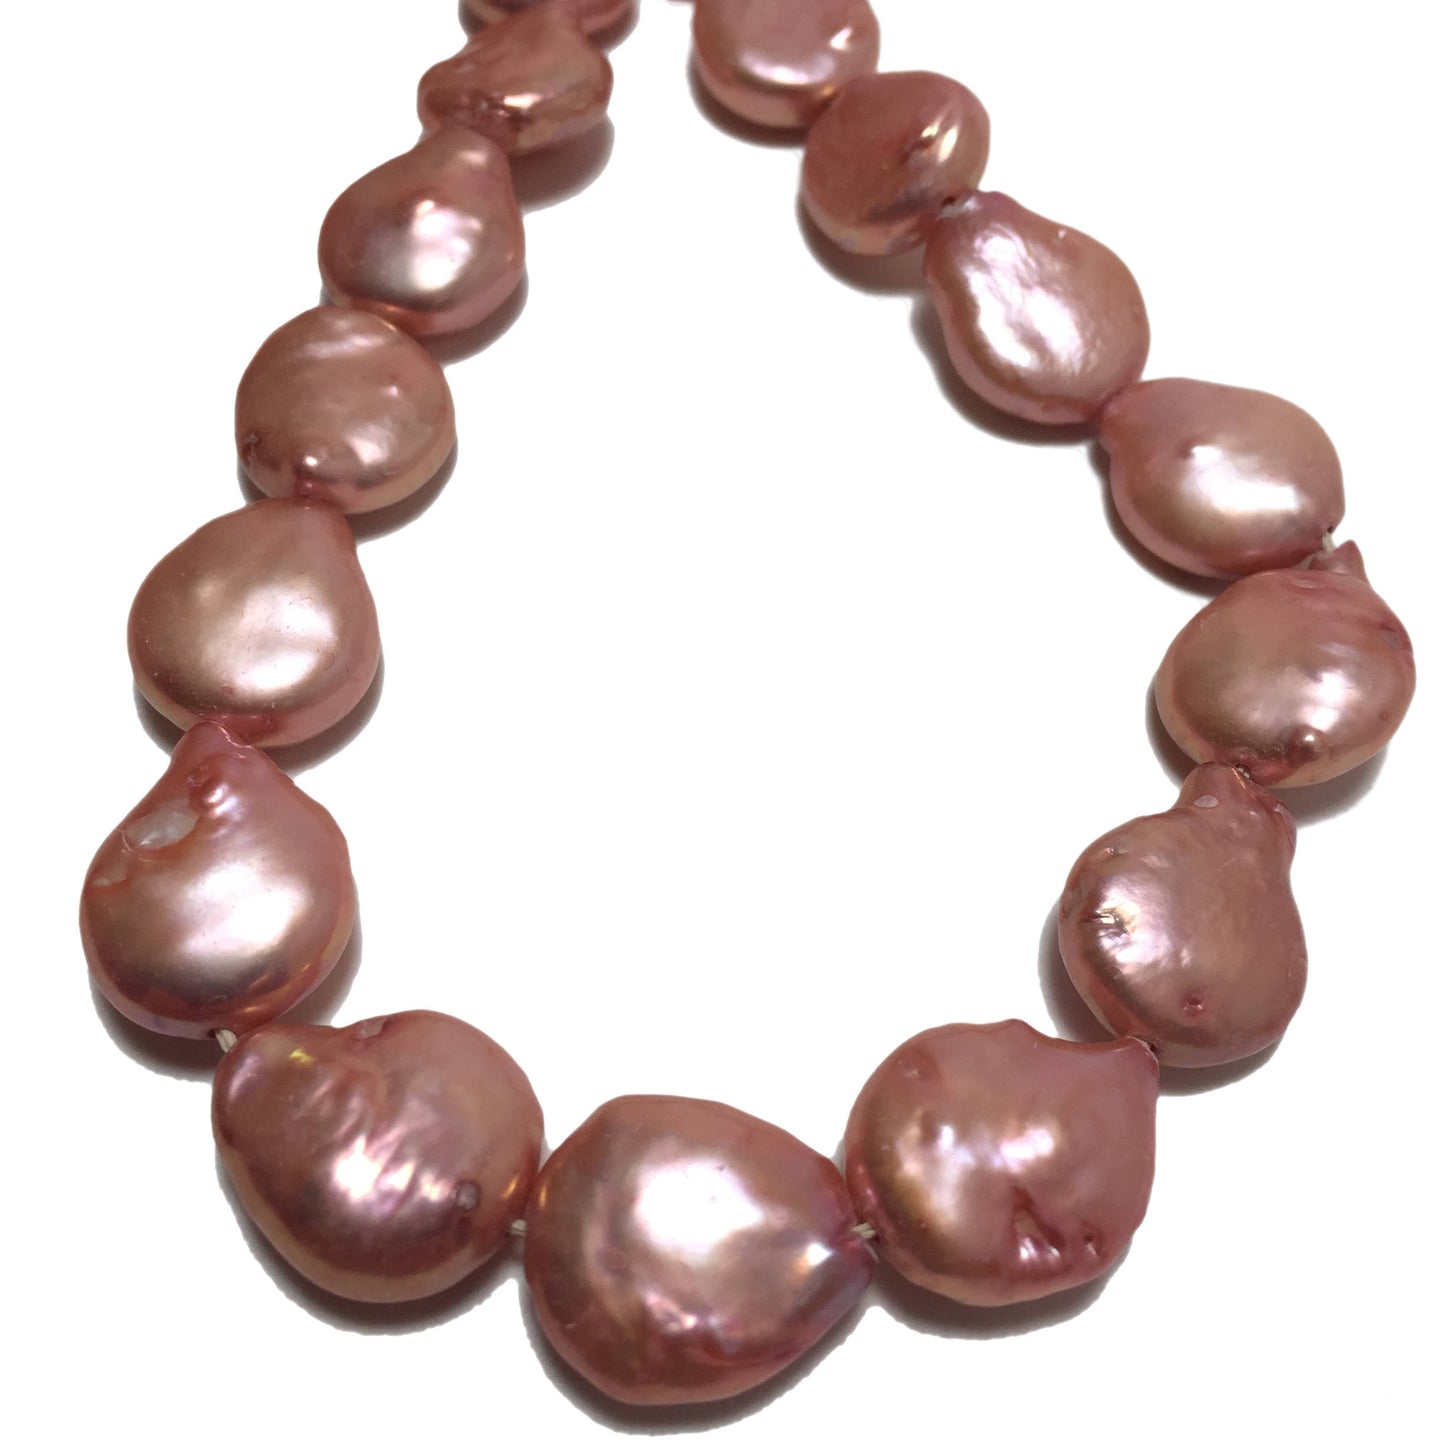 Coin Pearls, 10-12mm Cherry Pink Freshwater Pearls in 16 inches, COIN001